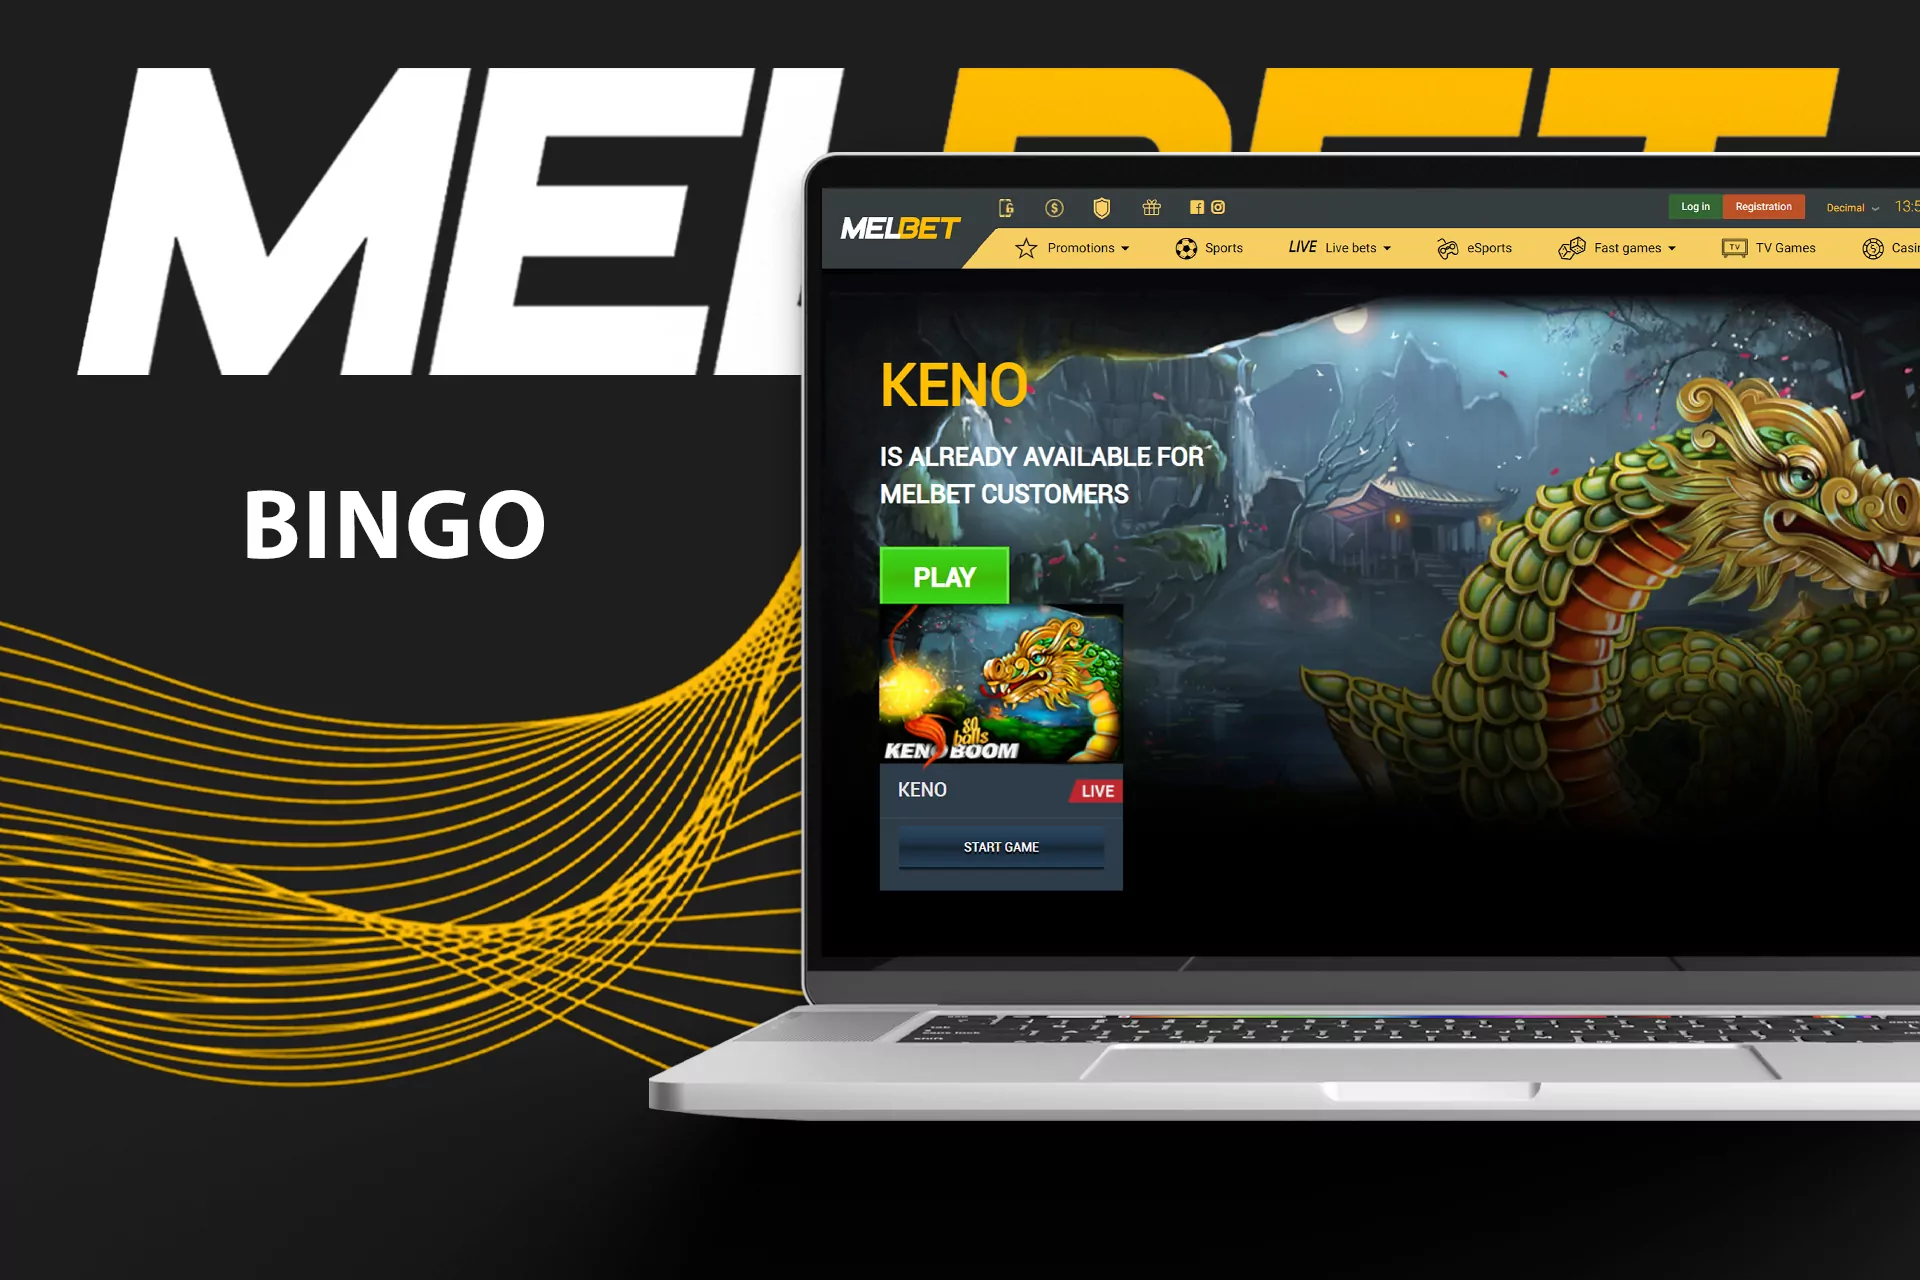 You can play a live Keno game at the Bingo section on the Melbet.